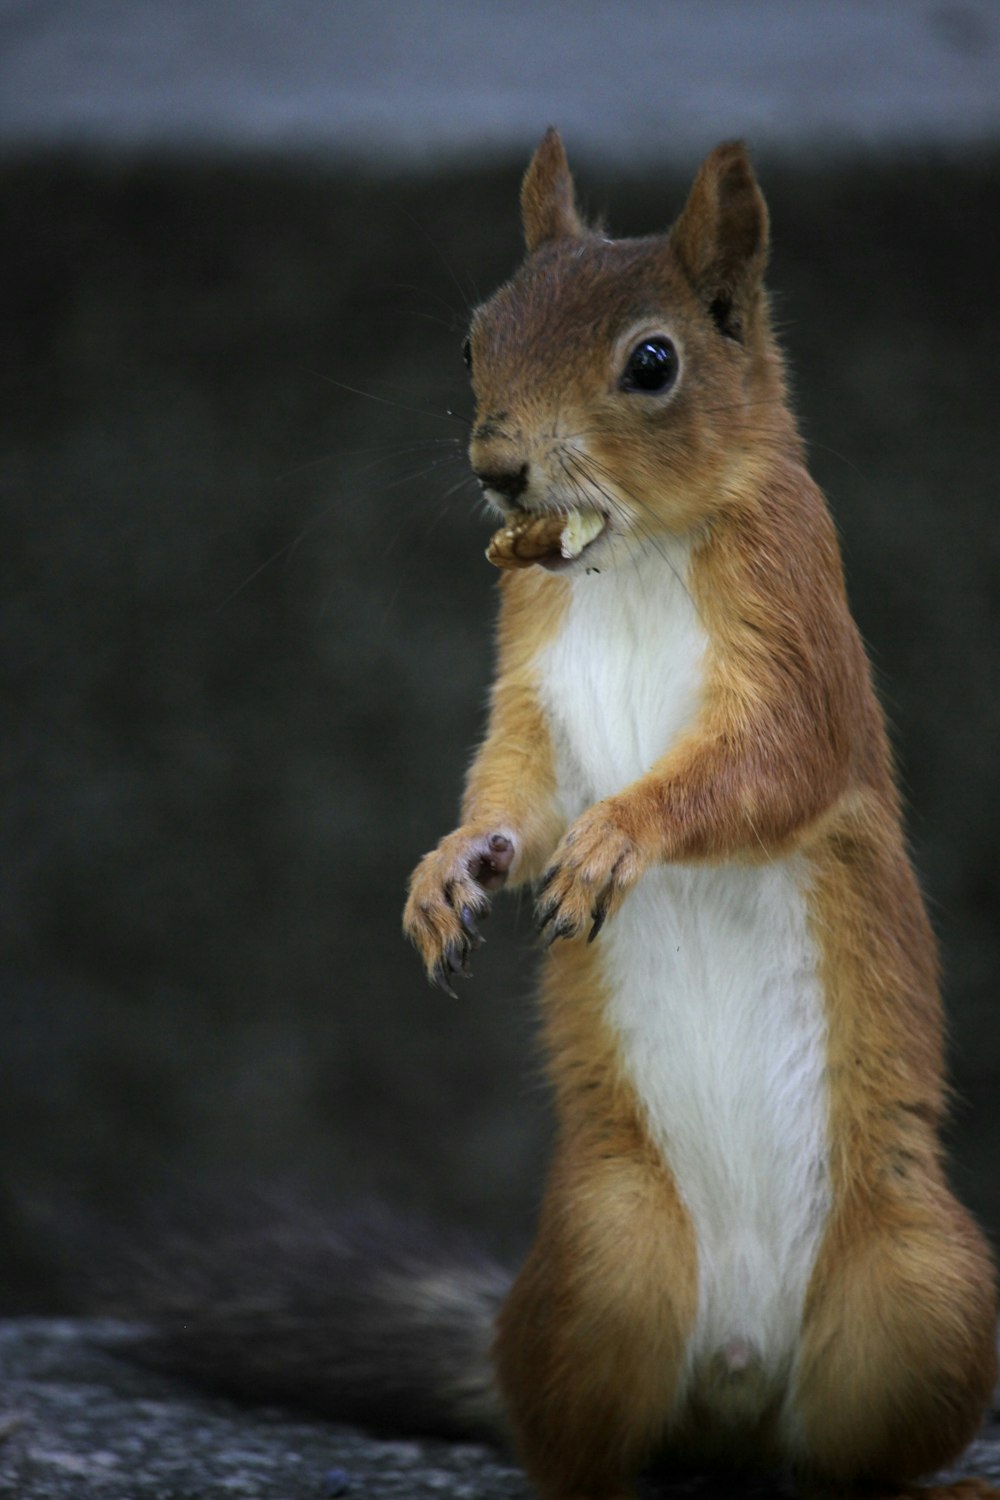 a squirrel is standing on its hind legs with a piece of food in its mouth